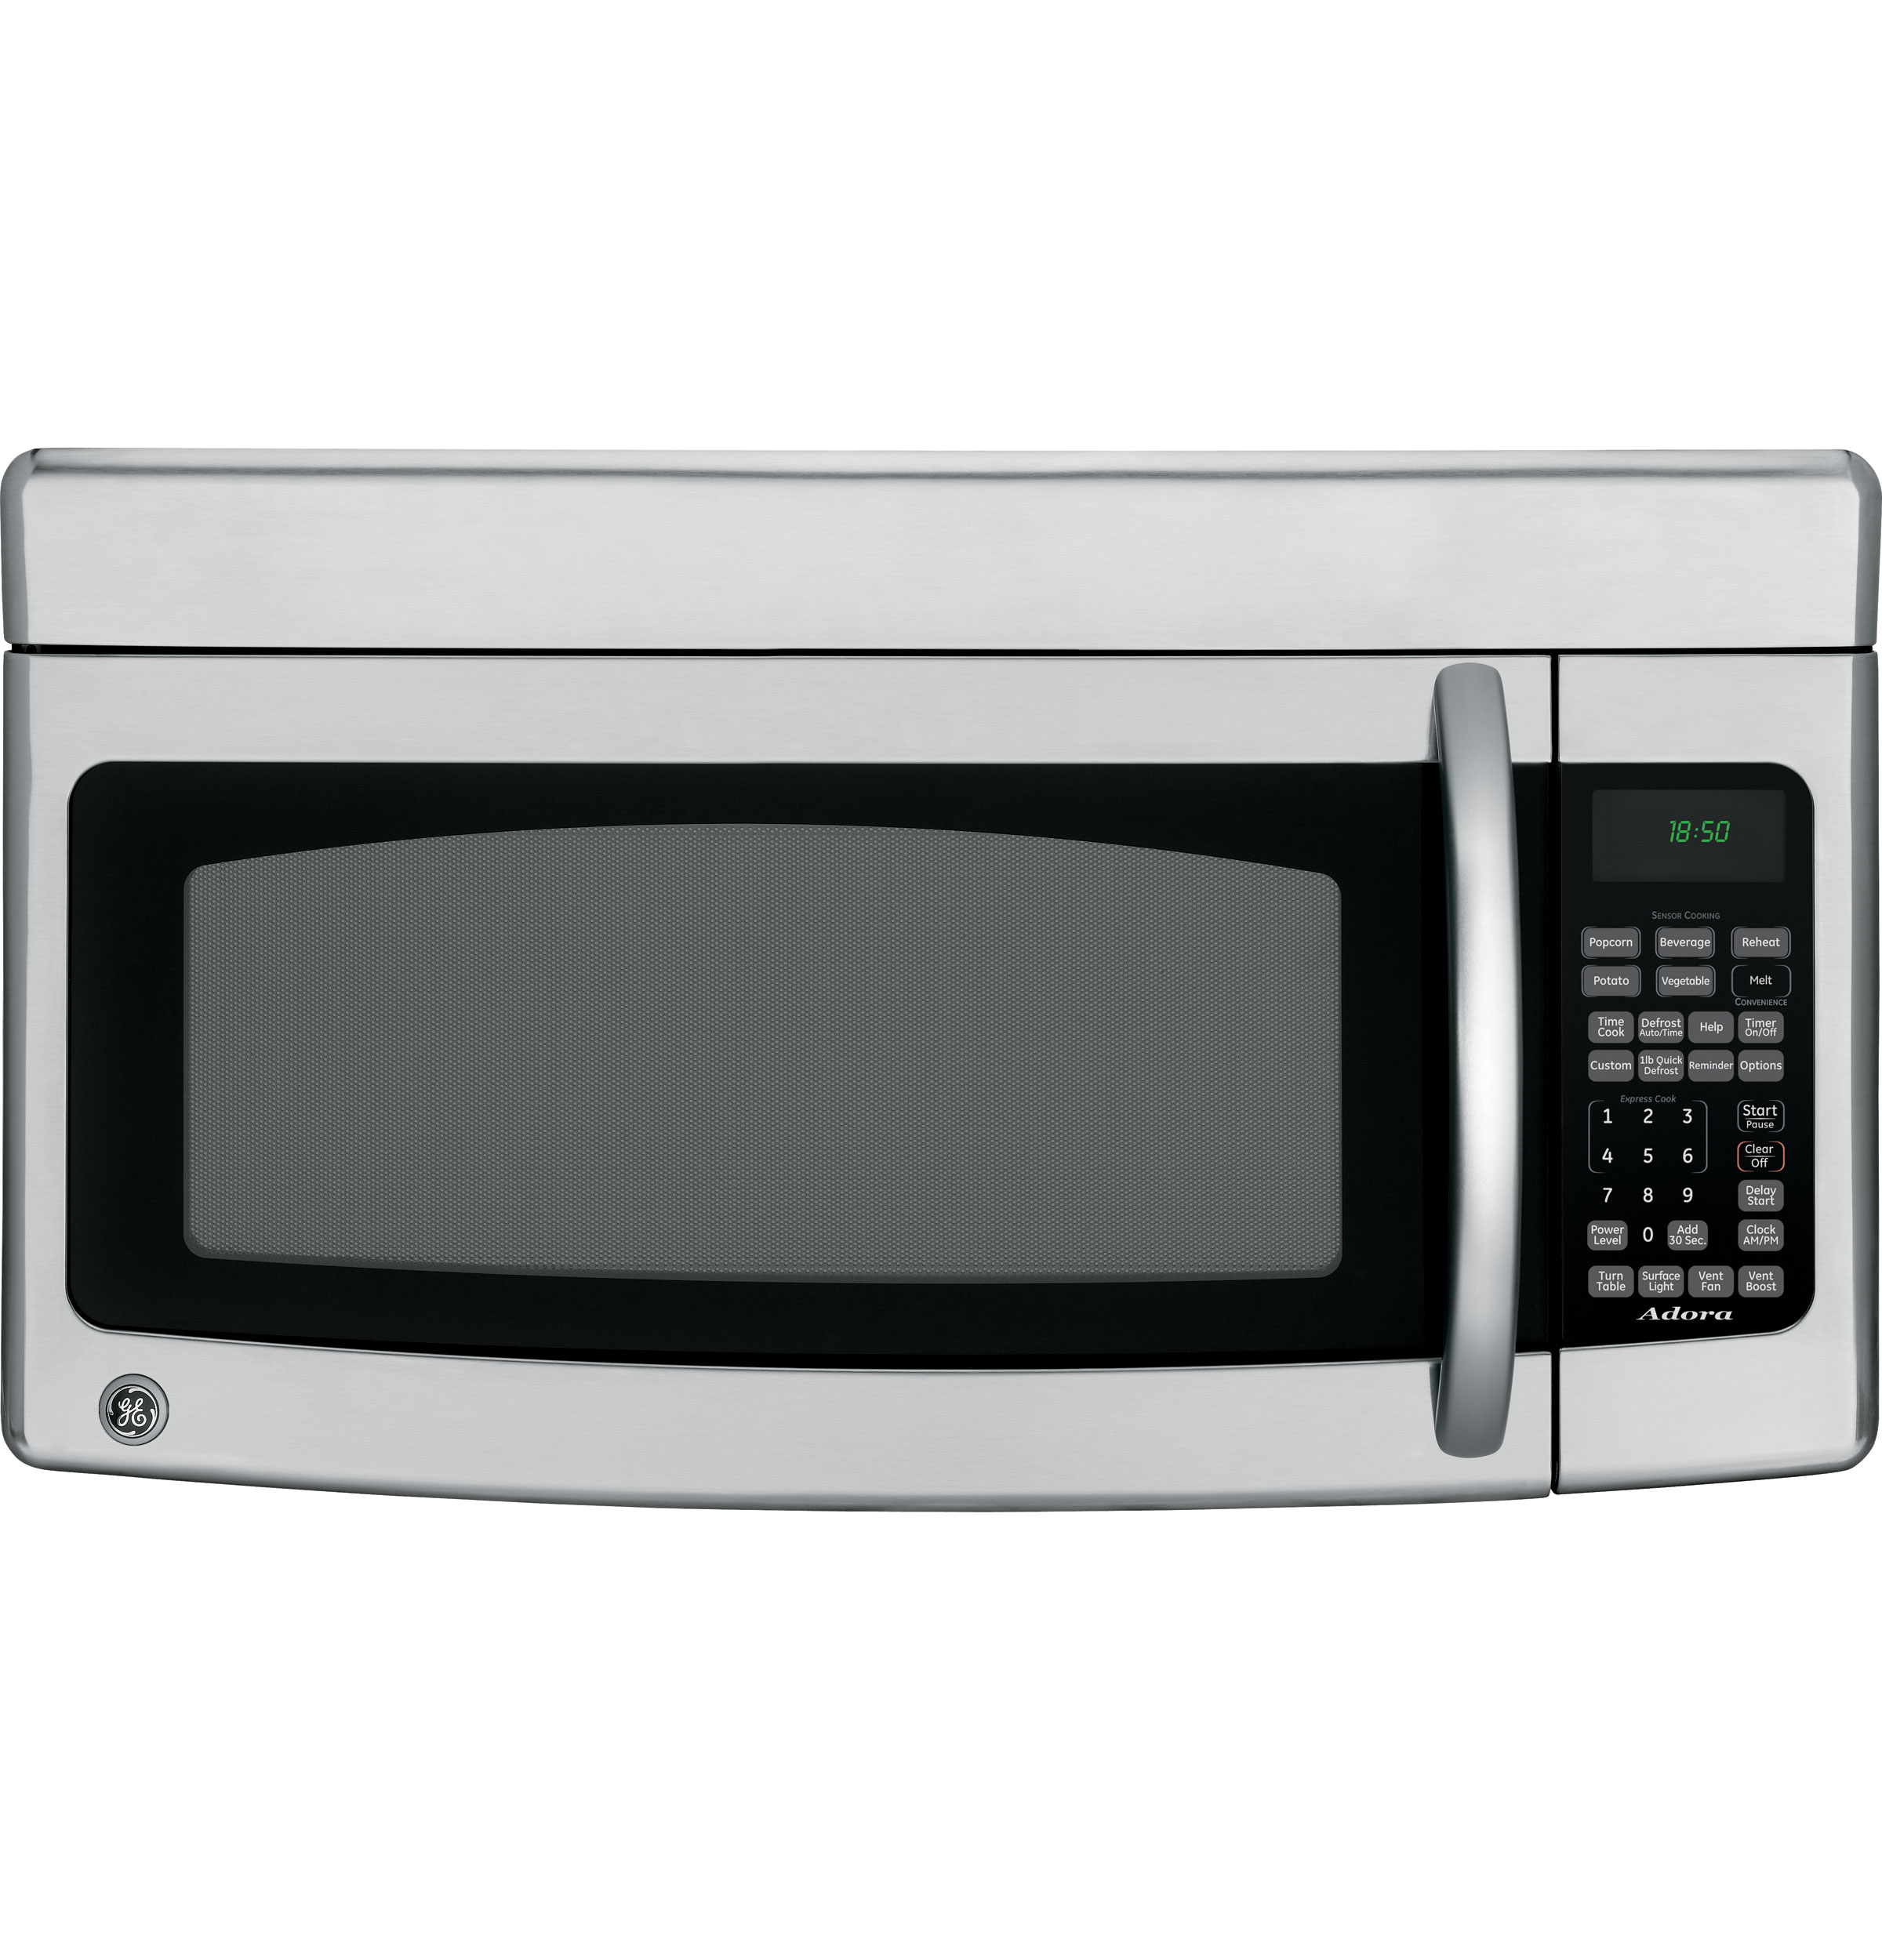 Adora series by GE® 1.8 Cu. Ft. Over-the-Range Microwave Oven